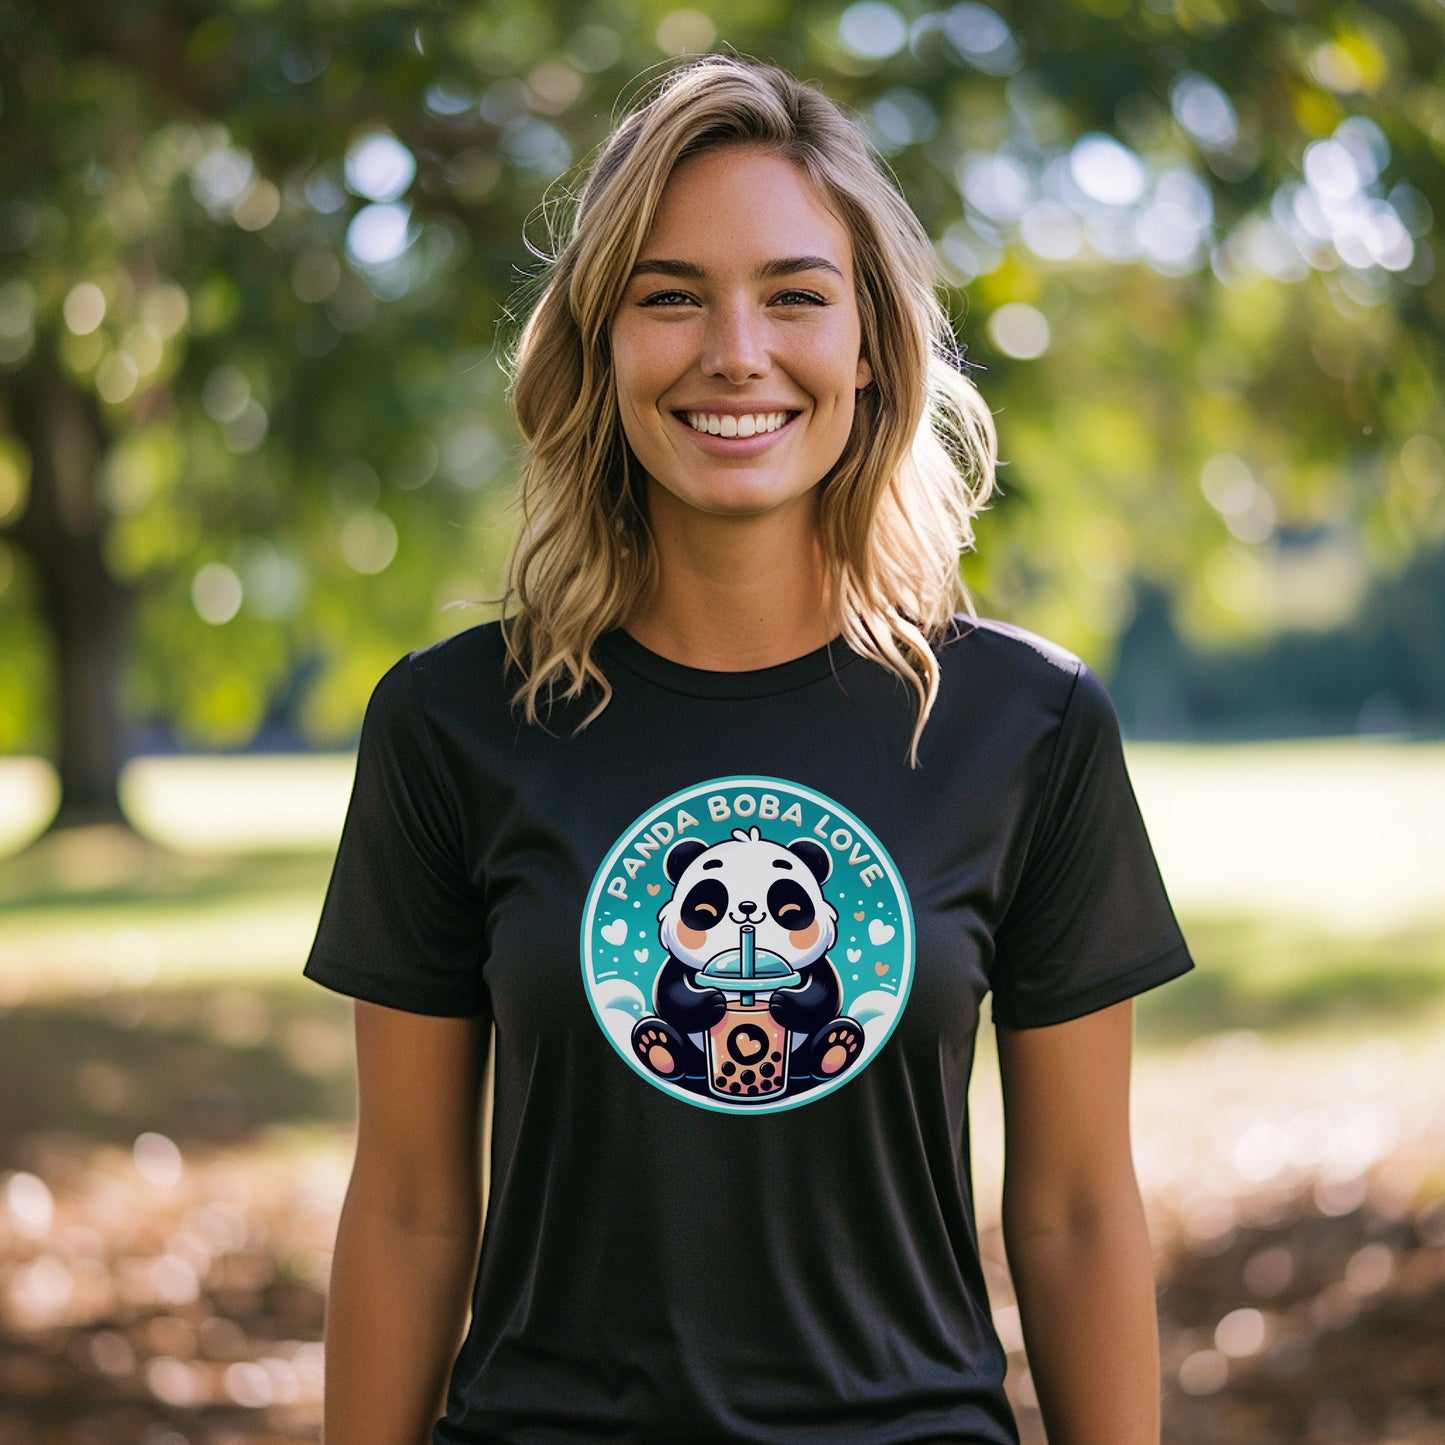 Cute Panda Sipping Boba Tea: Novelty T-Shirt for Bubble Tea and Panda Lovers - Unique Blend of Cuteness & Trendy Beverage Fashion Statement